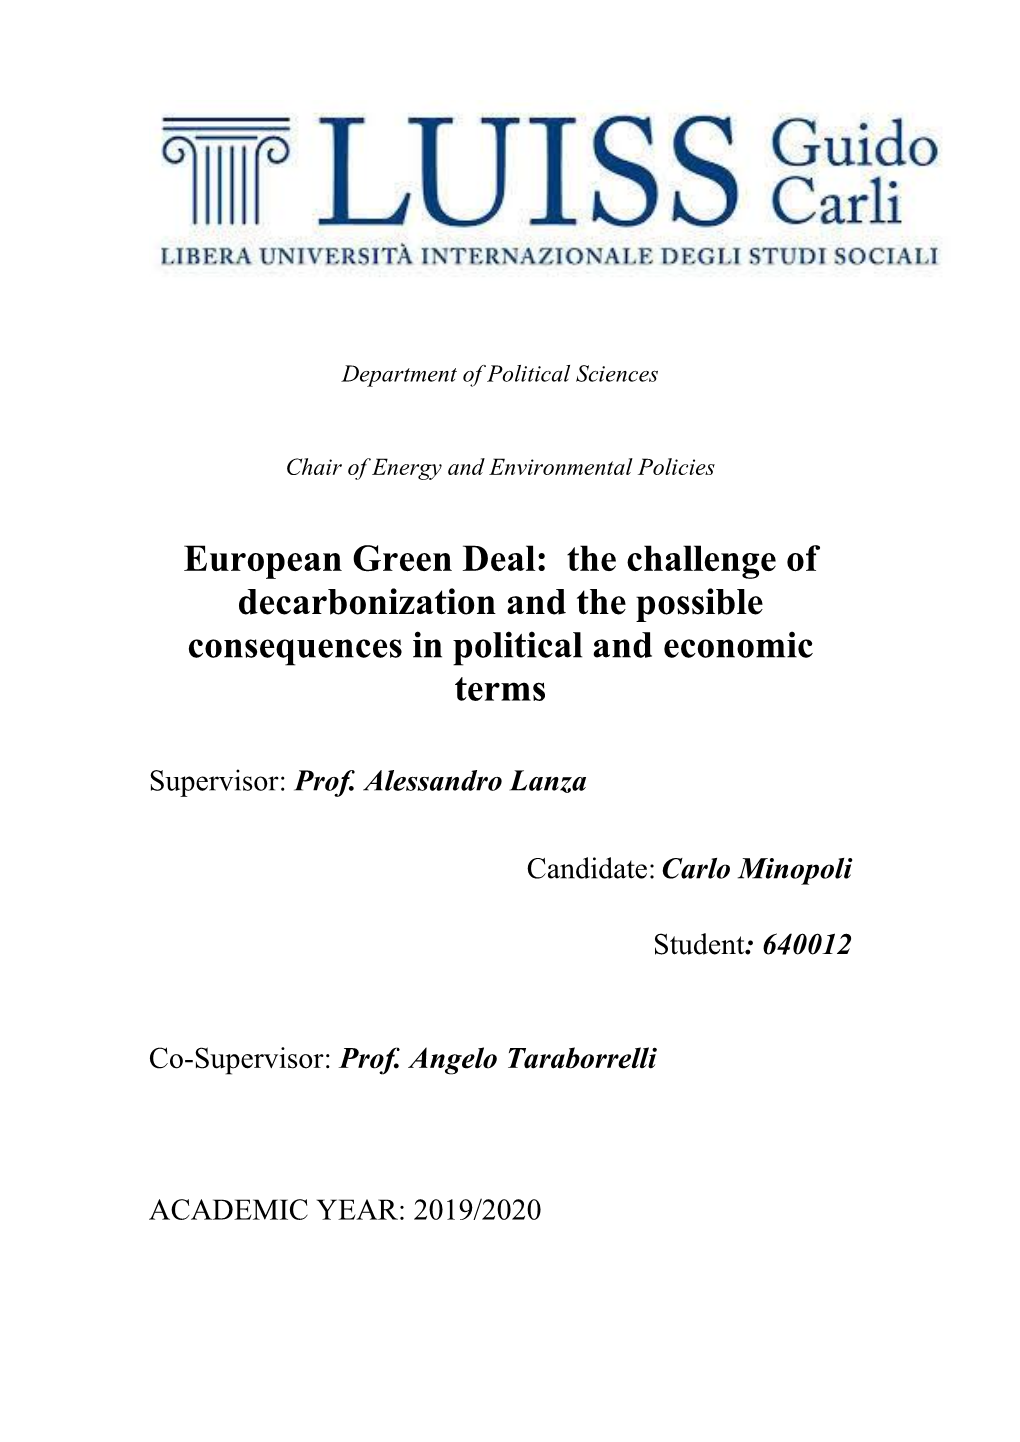 The Challenge of Decarbonization and the Possible Consequences in Political and Economic Terms